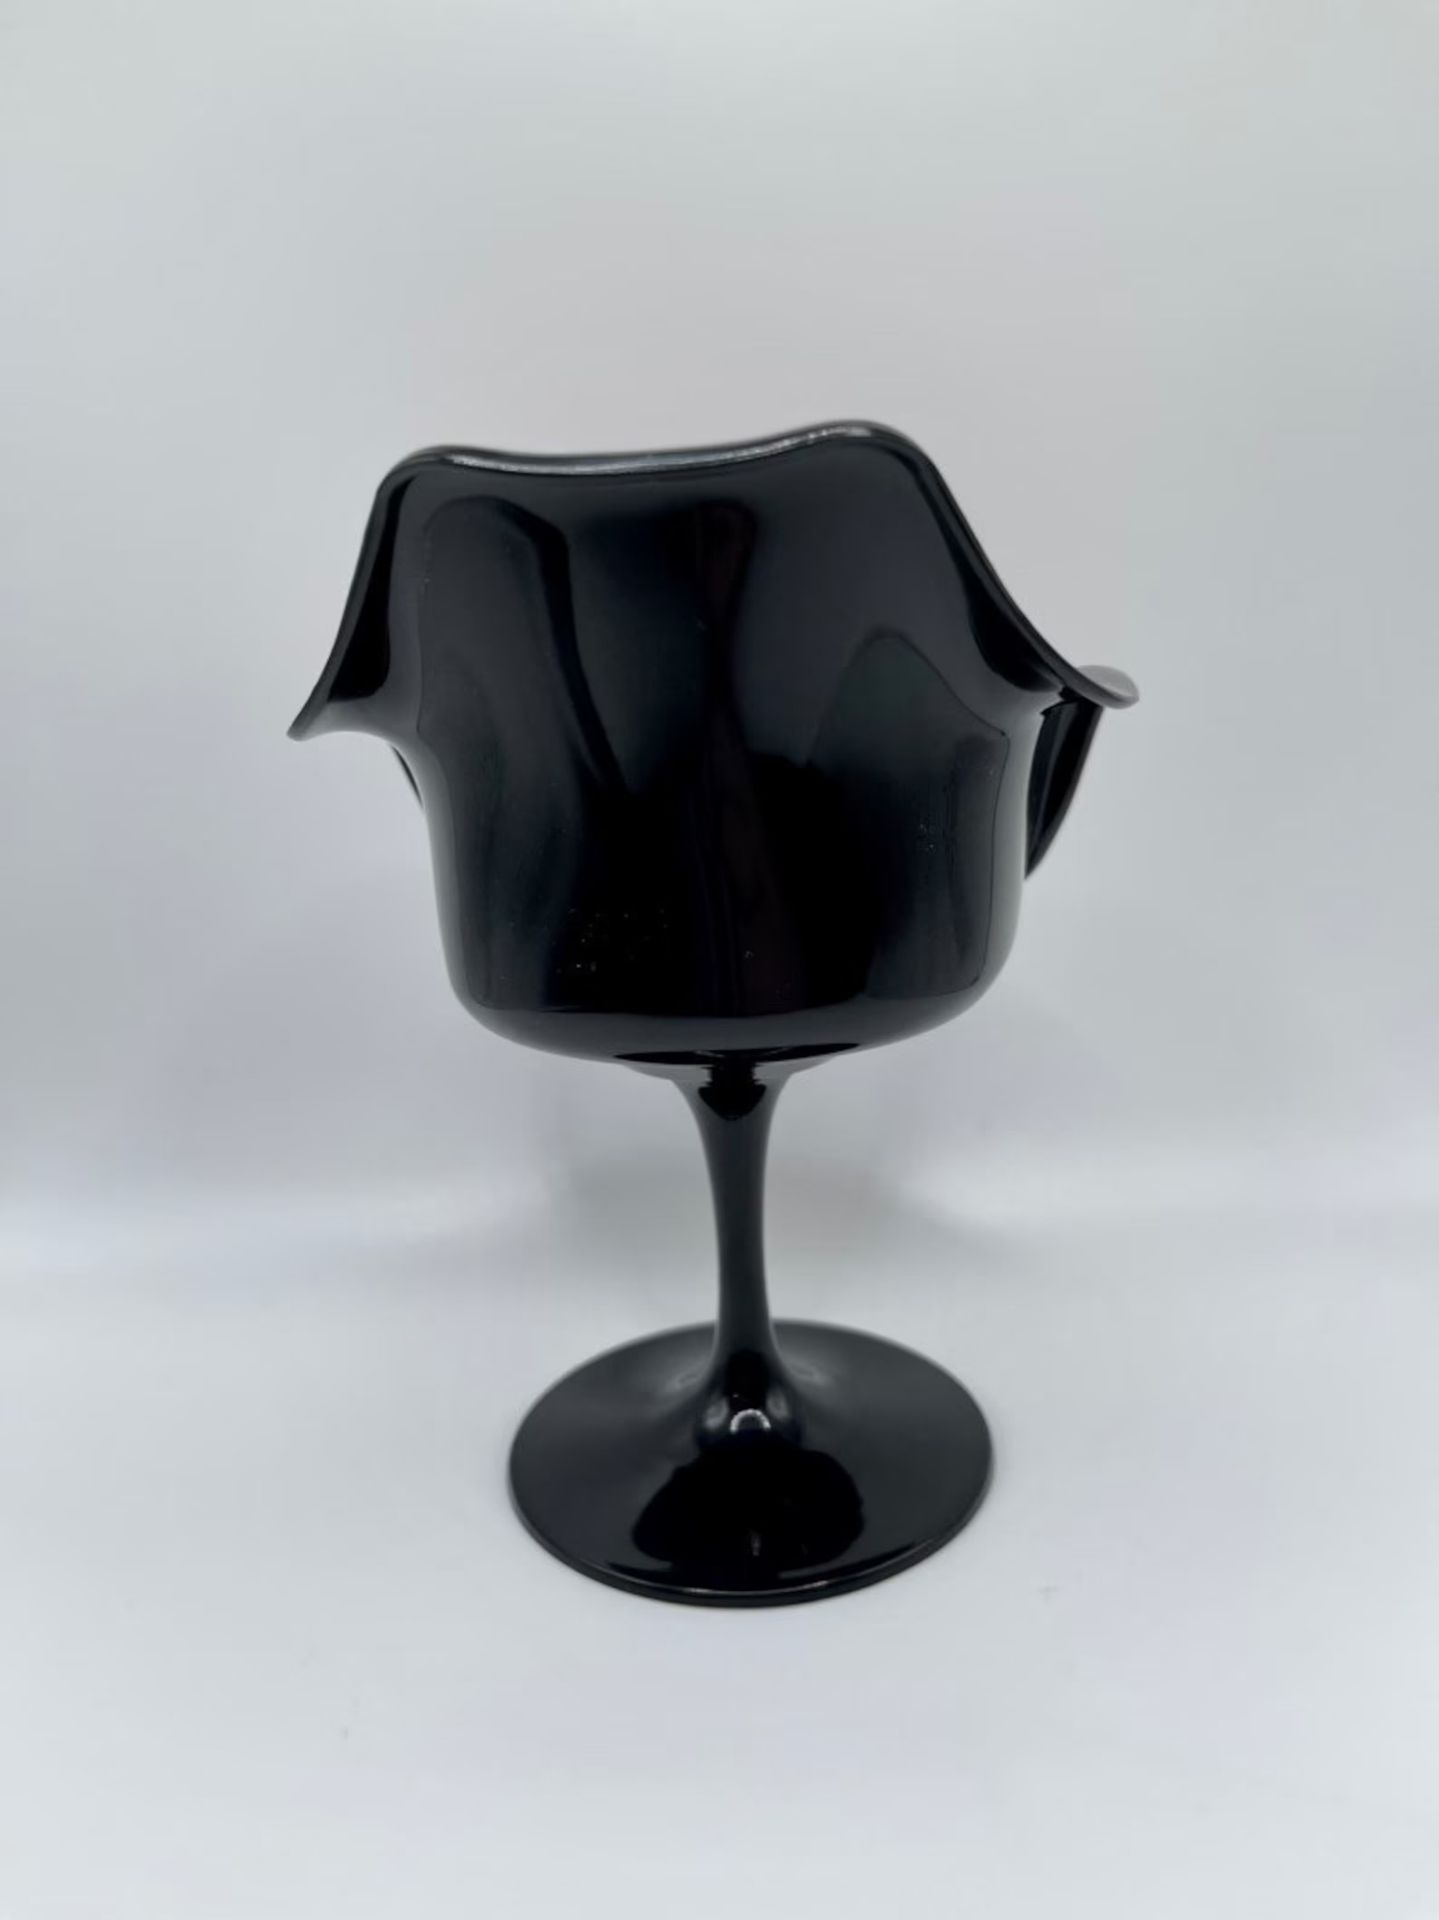 Pair of Tulip Chairs, 1/6 Scale Desk Display - Image 4 of 7